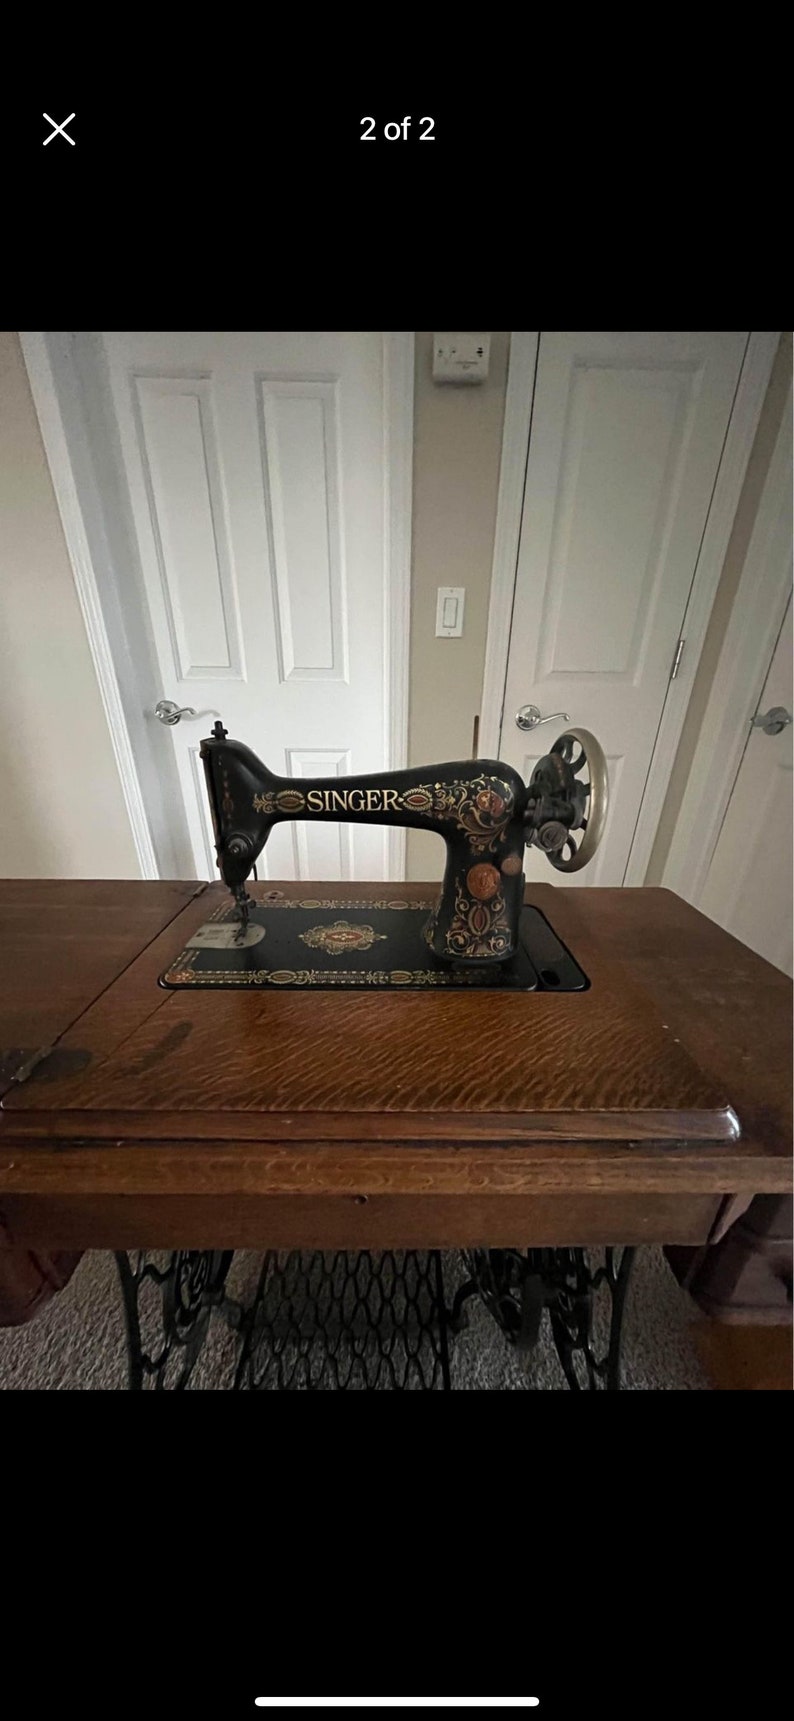 Singer Mfg Co Sewing Machine, table and stand, very solid, Great old time look, Just like grandma used, see shipping info in desc image 2